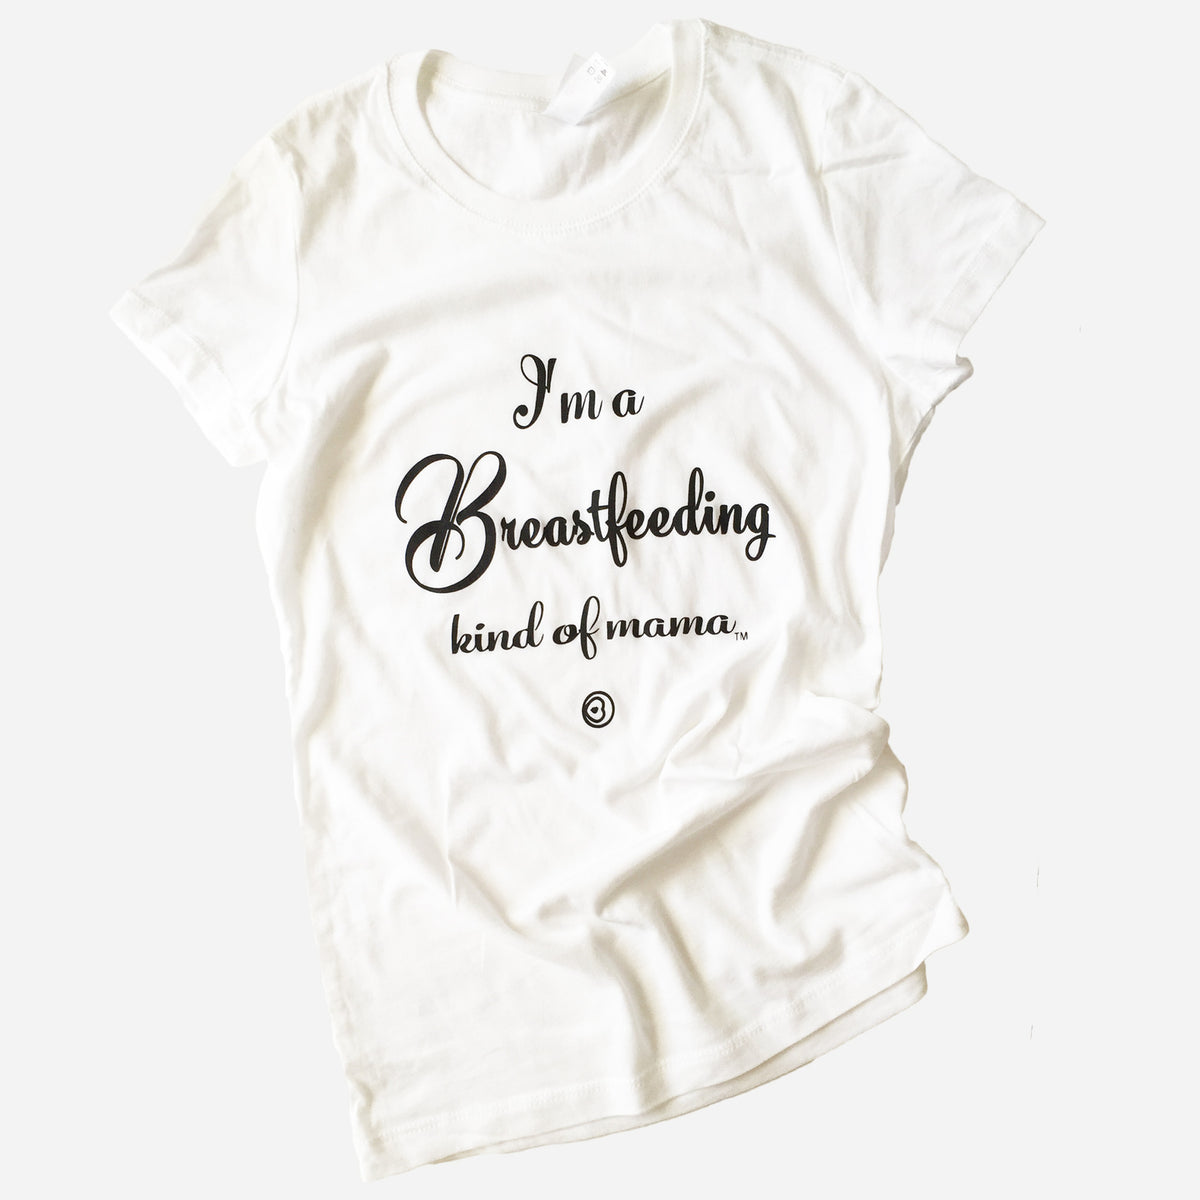 "I'm a Breastfeeding kind of mama®" T-shirt in White